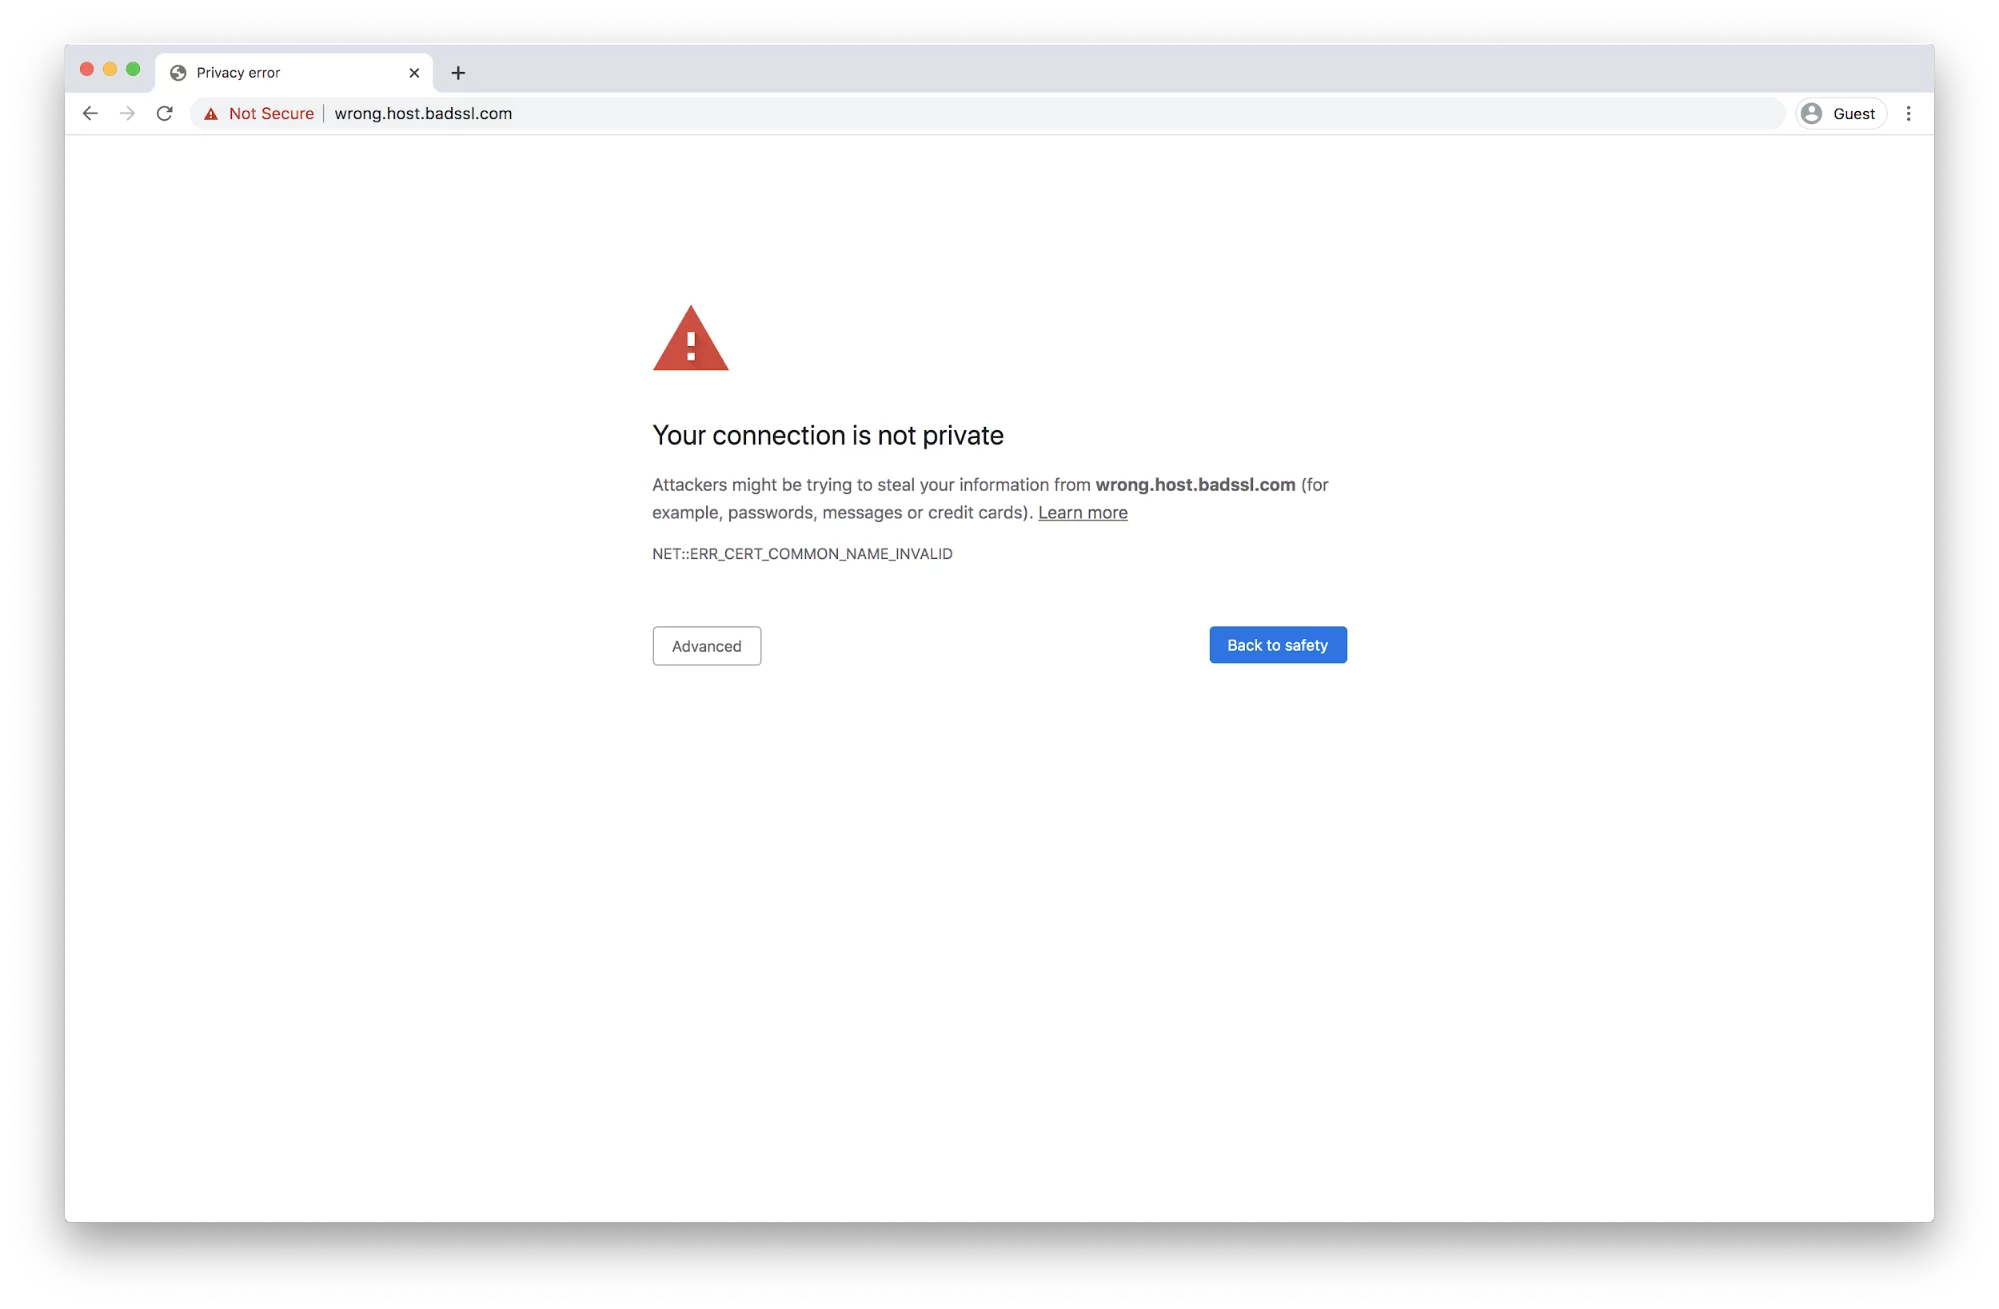 What Is an SSL Certificate Error & How to Fix Them - Sematext